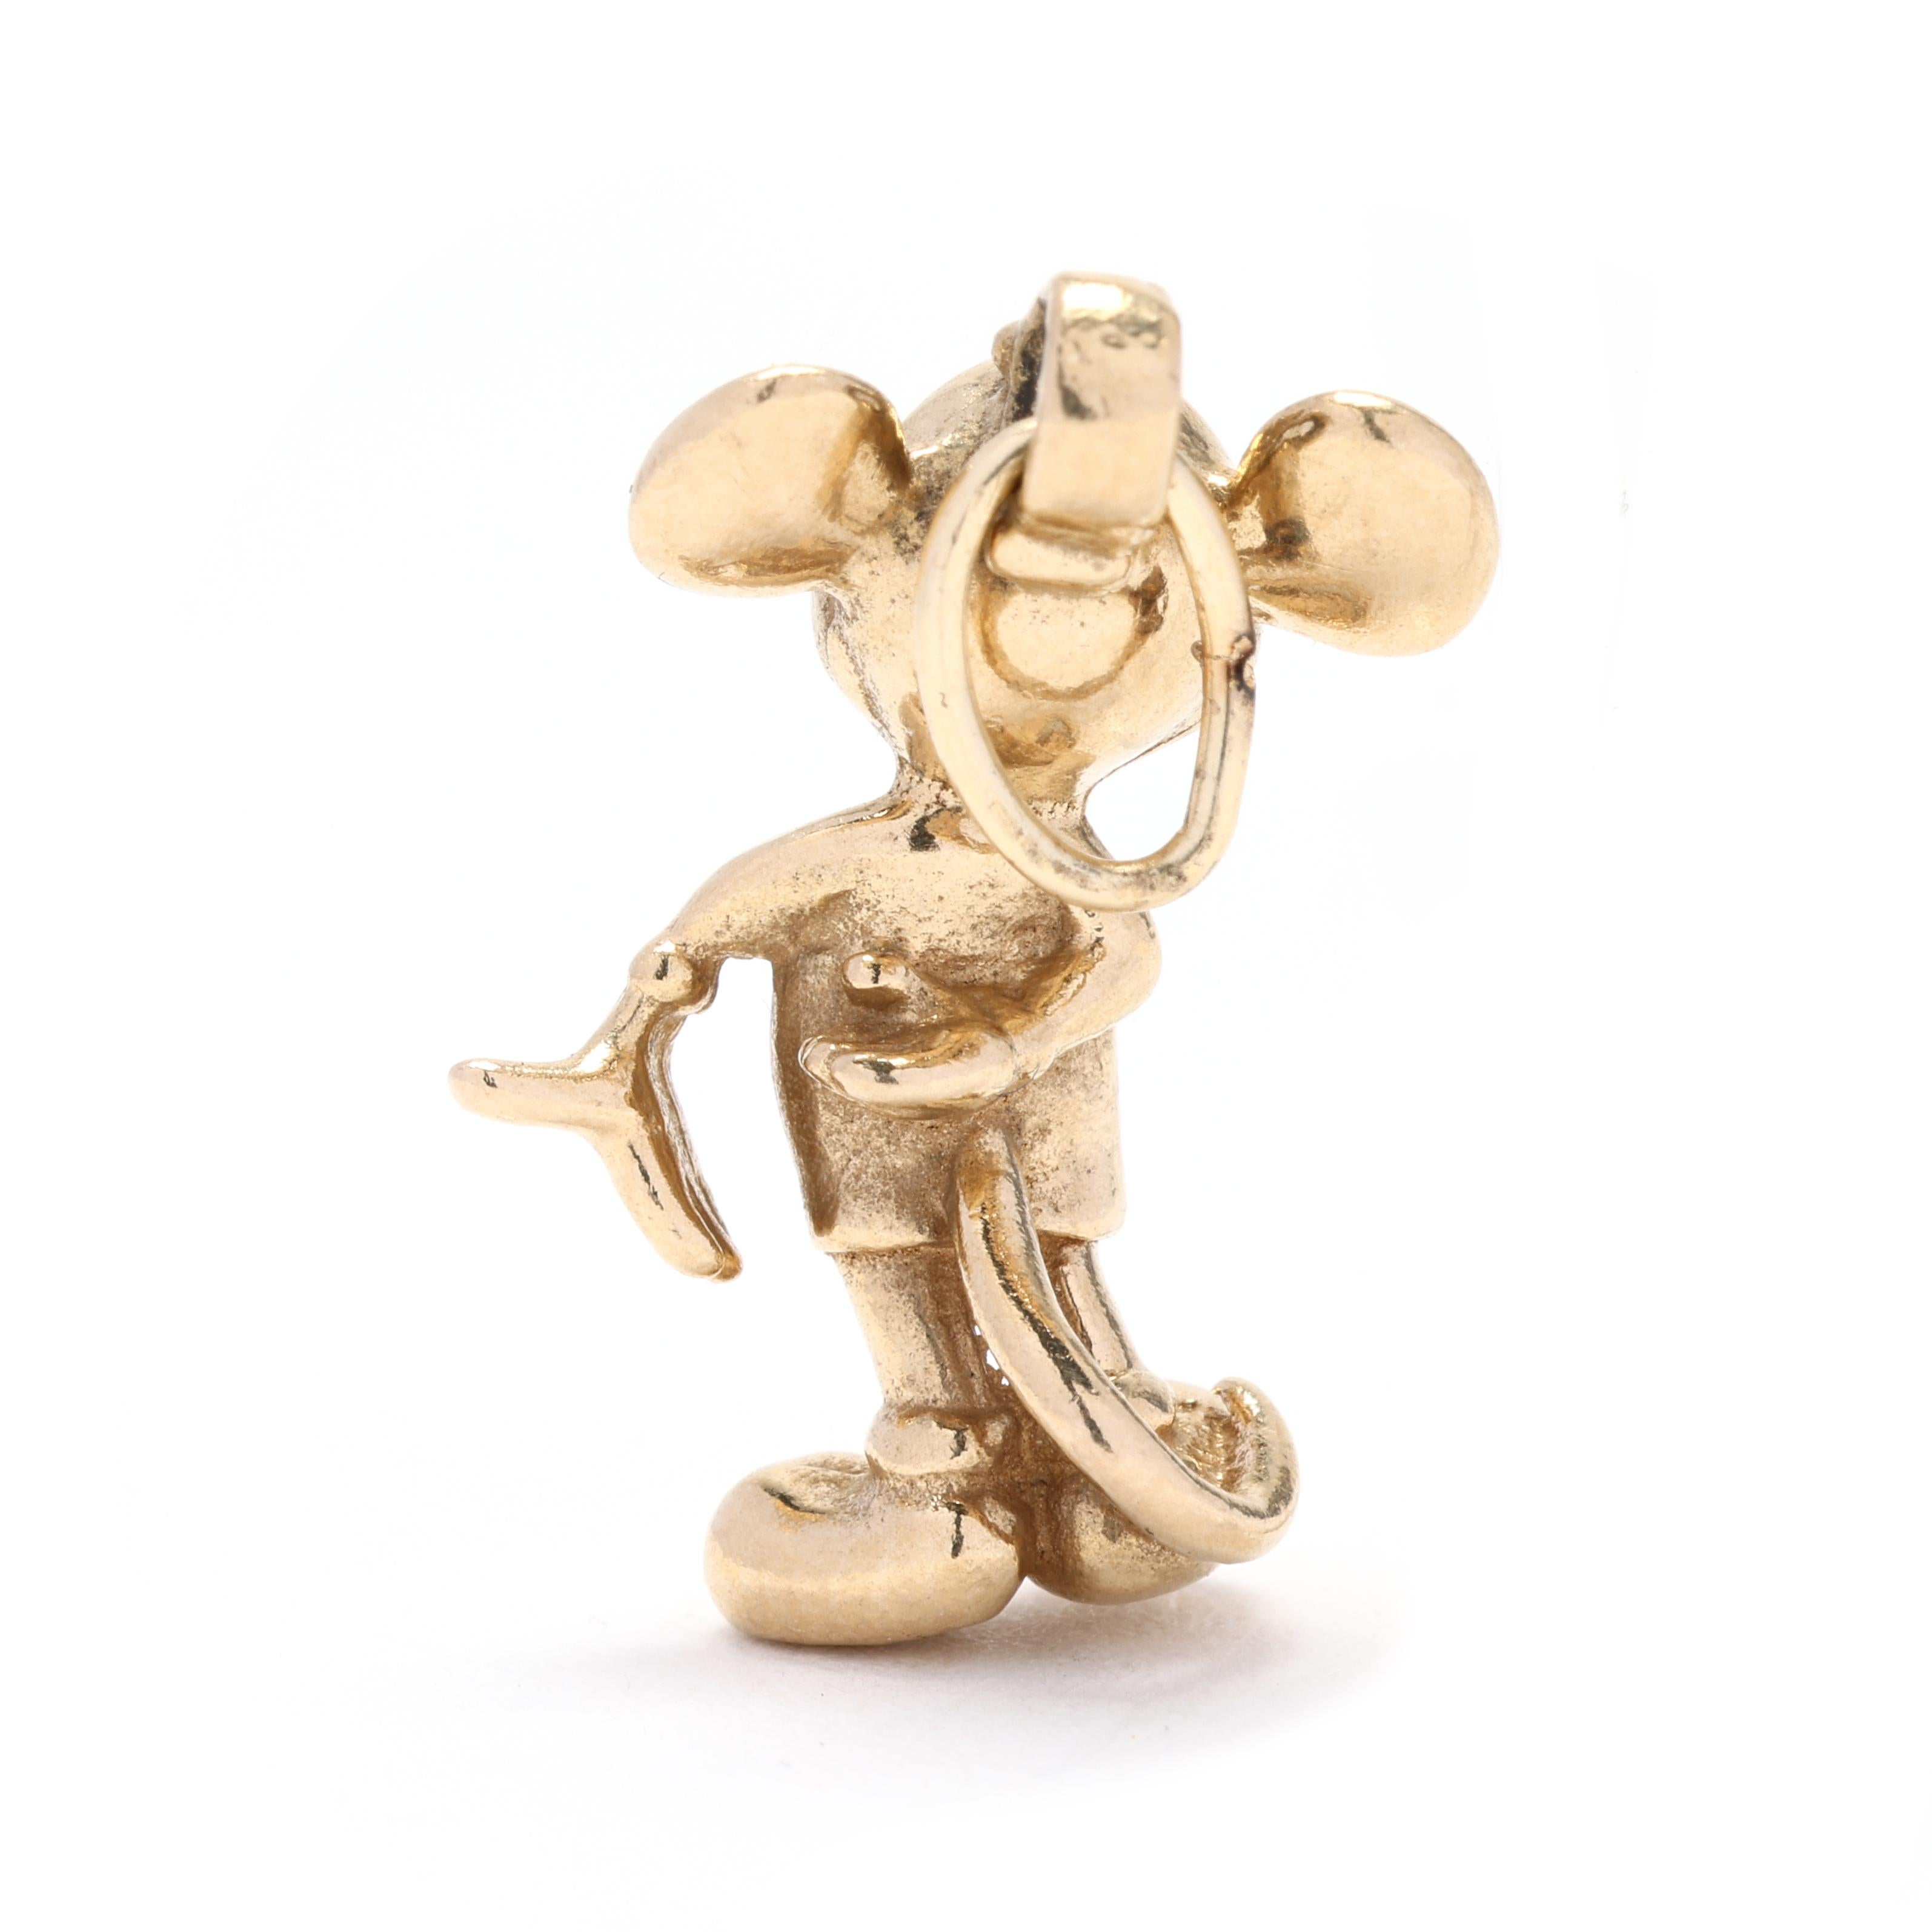 This charm is not only a delightful addition to a charm bracelet but can also be worn as a pendant on a chain or added to a charm necklace for a whimsical touch. Its versatile size and design make it a great option for any Disney enthusiast looking